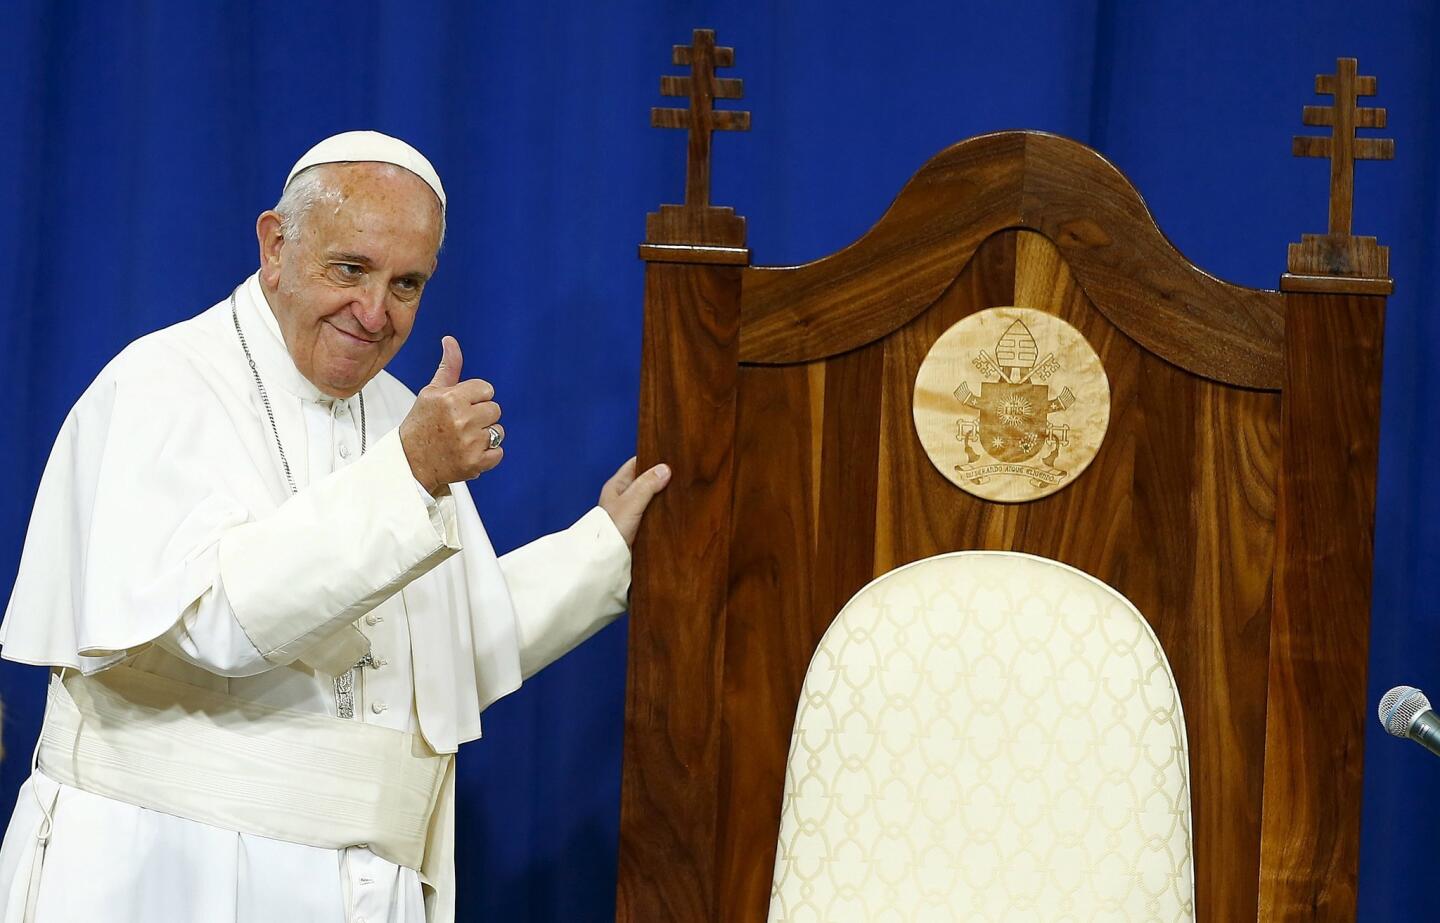 Pope Francis acknowledges the chair made for him by inmates at Curran-Fromhold Correctional Facility on Sept. 27, 2015, in Philadelphia.